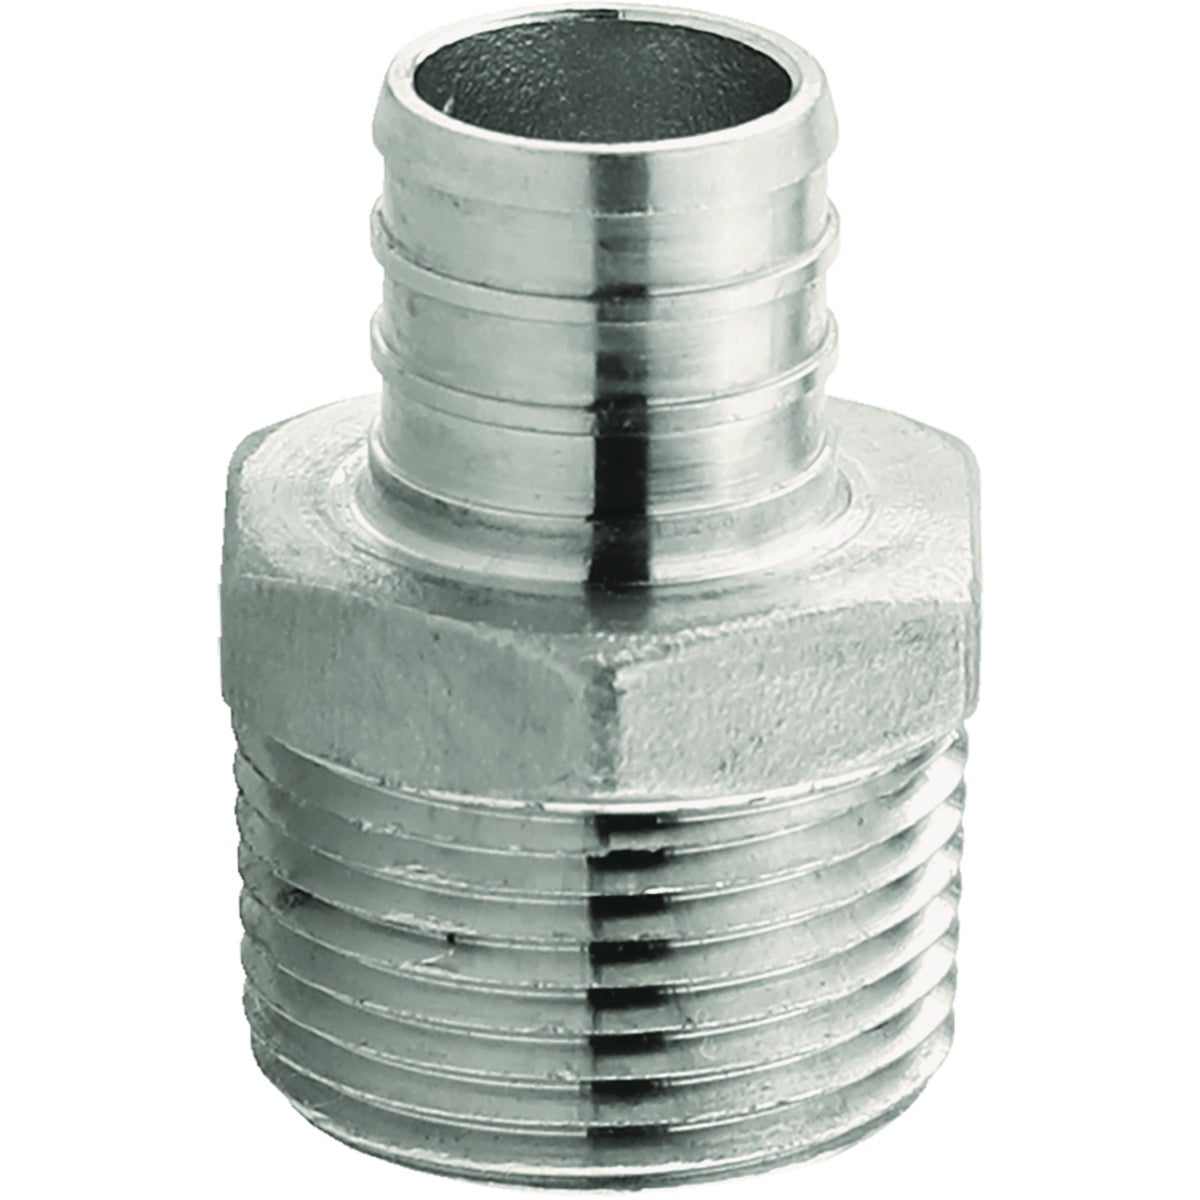 Plumbeez 3/4 In. x 3/4 In. MPT Stainless Steel PEX Adapter